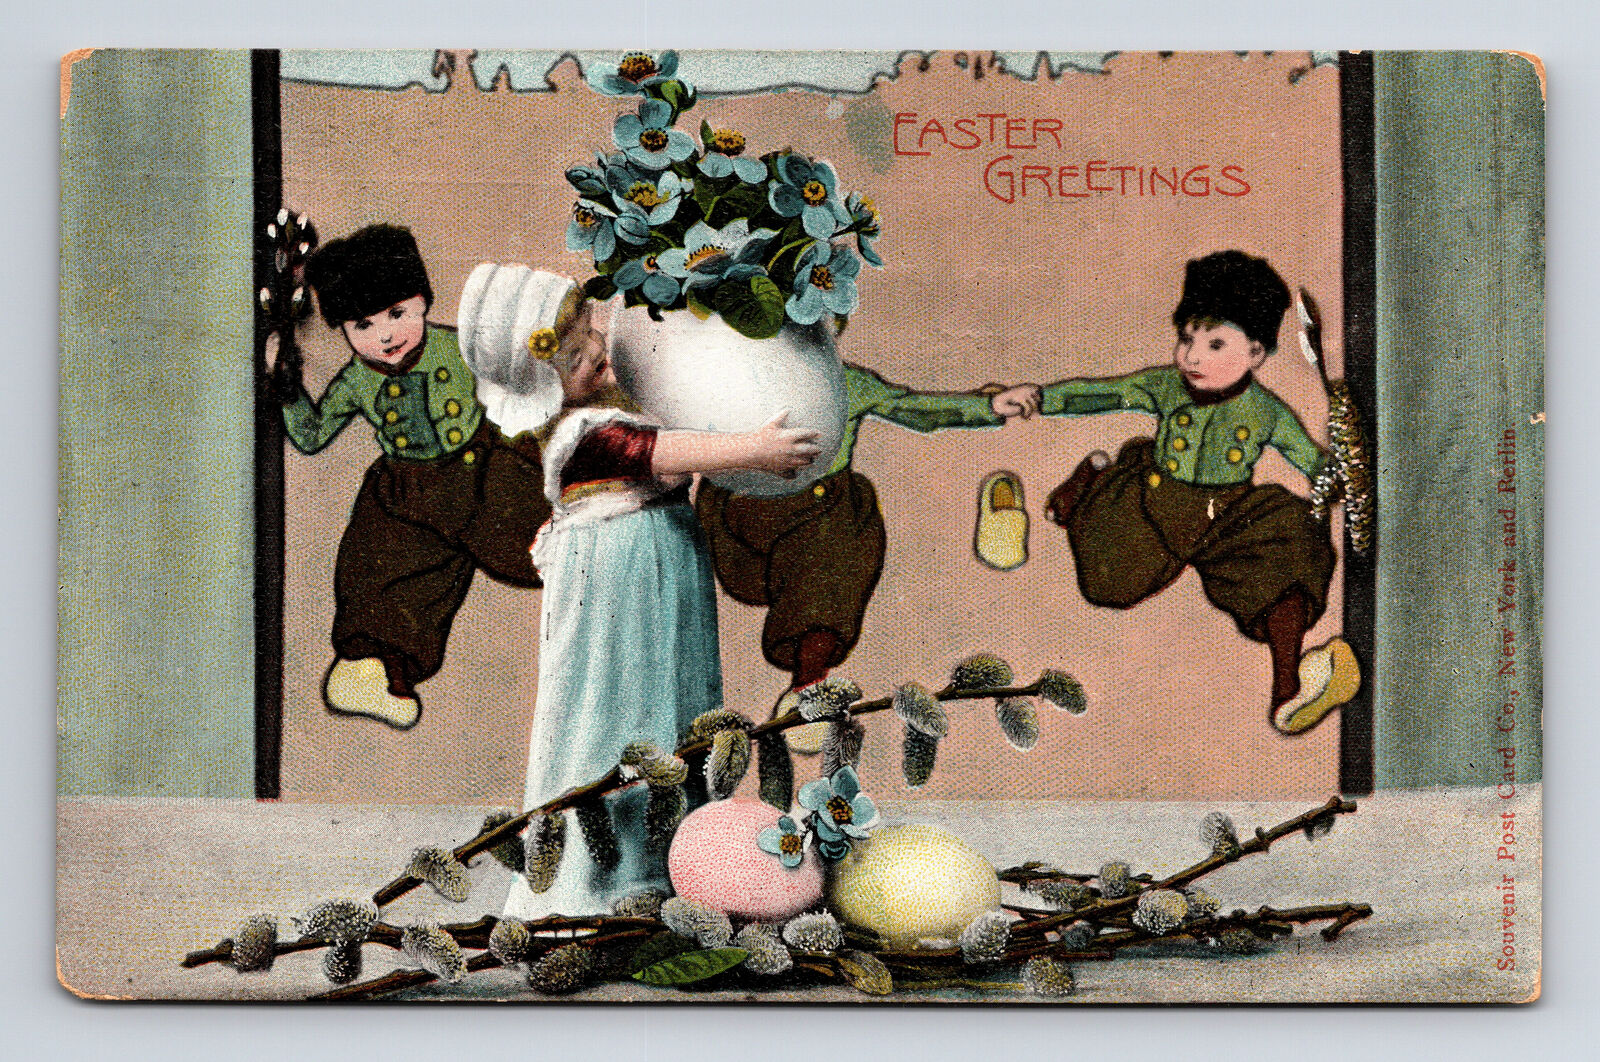 1909 Dutch Girl Carries Giant Egg Full of Forget Me Not Flowers Willows Postcard